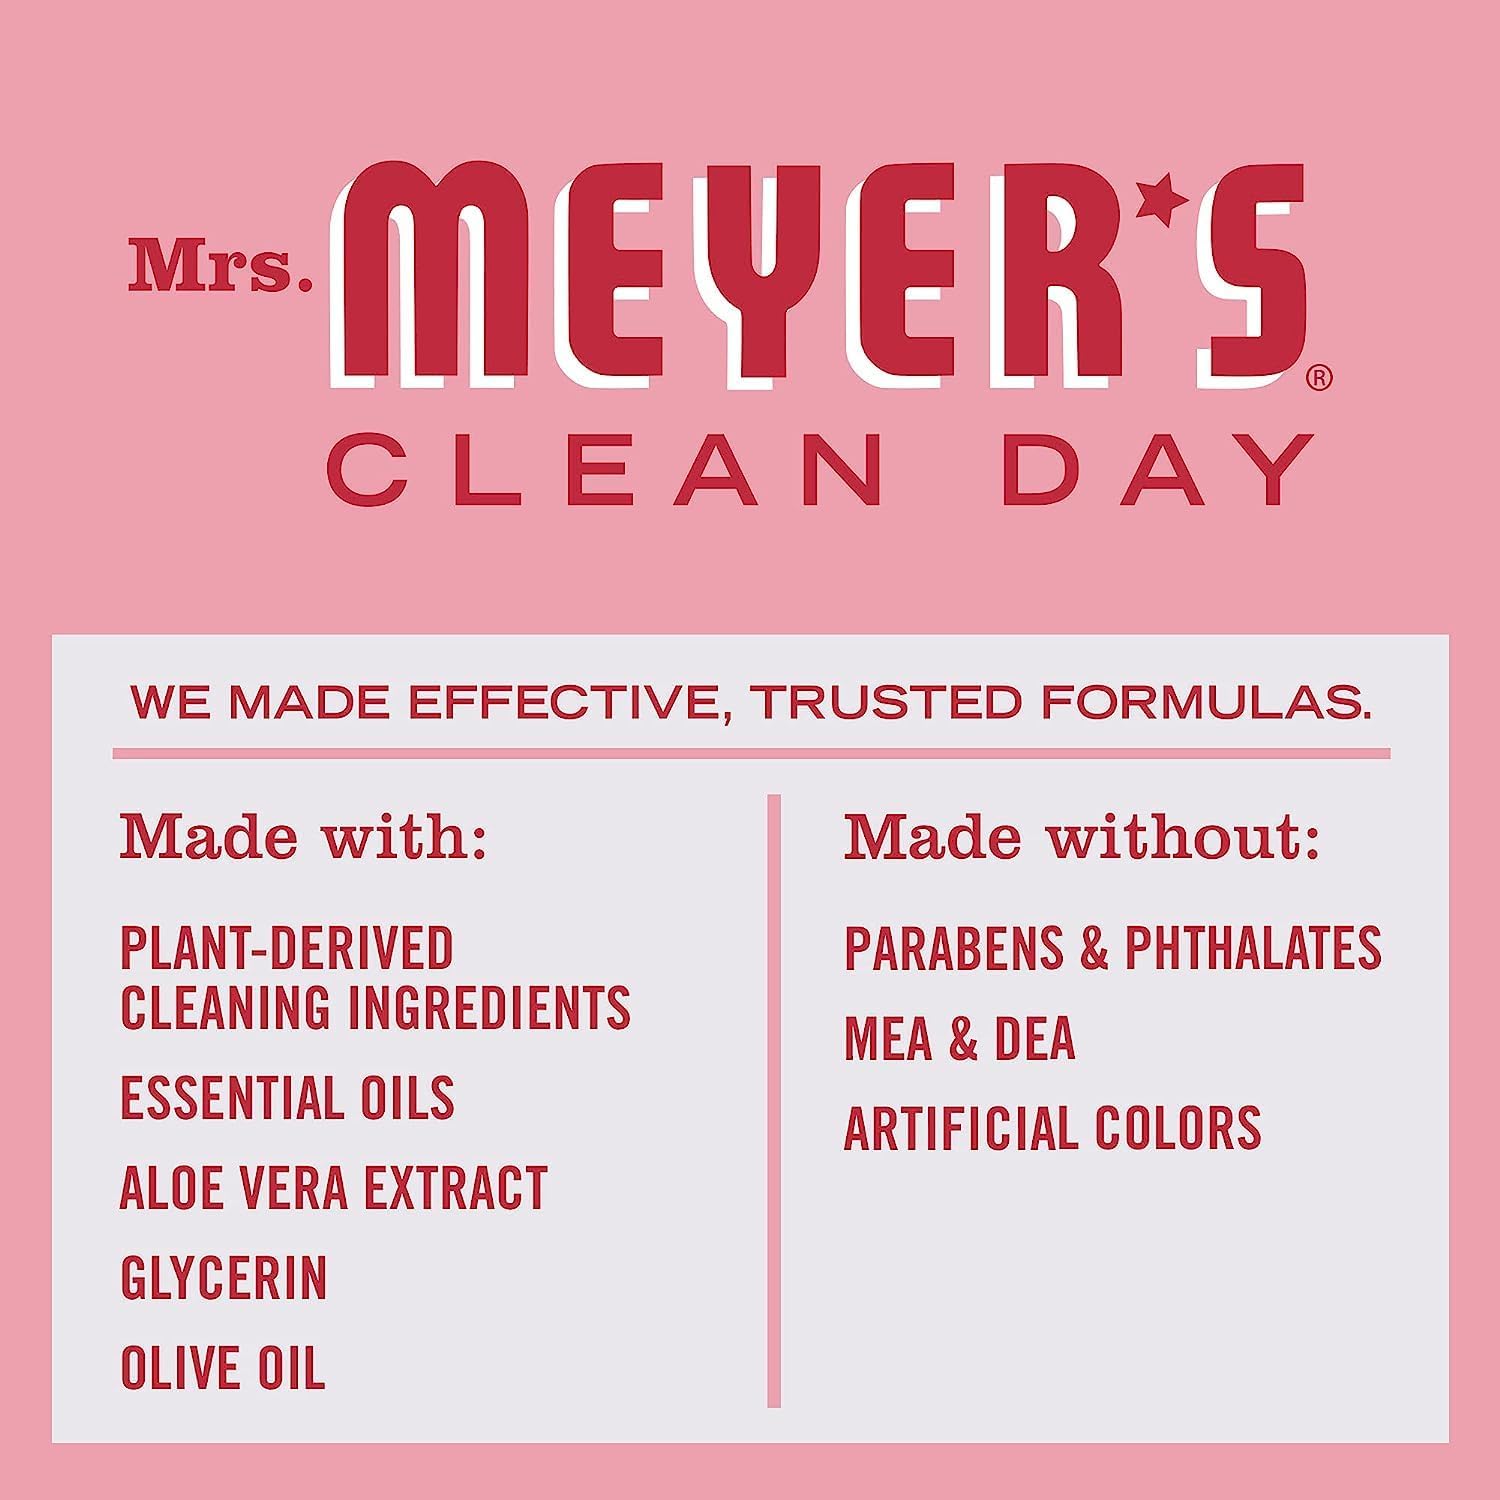 MRS. MEYER'S CLEAN DAY Variety, 2 Mrs. Meyer's Liquid Hand Soap 12.5 OZ, 1 Mrs. Meyer's Liquid Dish Soap, 16 FL OZ, 1 CT (Peppermint) : Health & Household